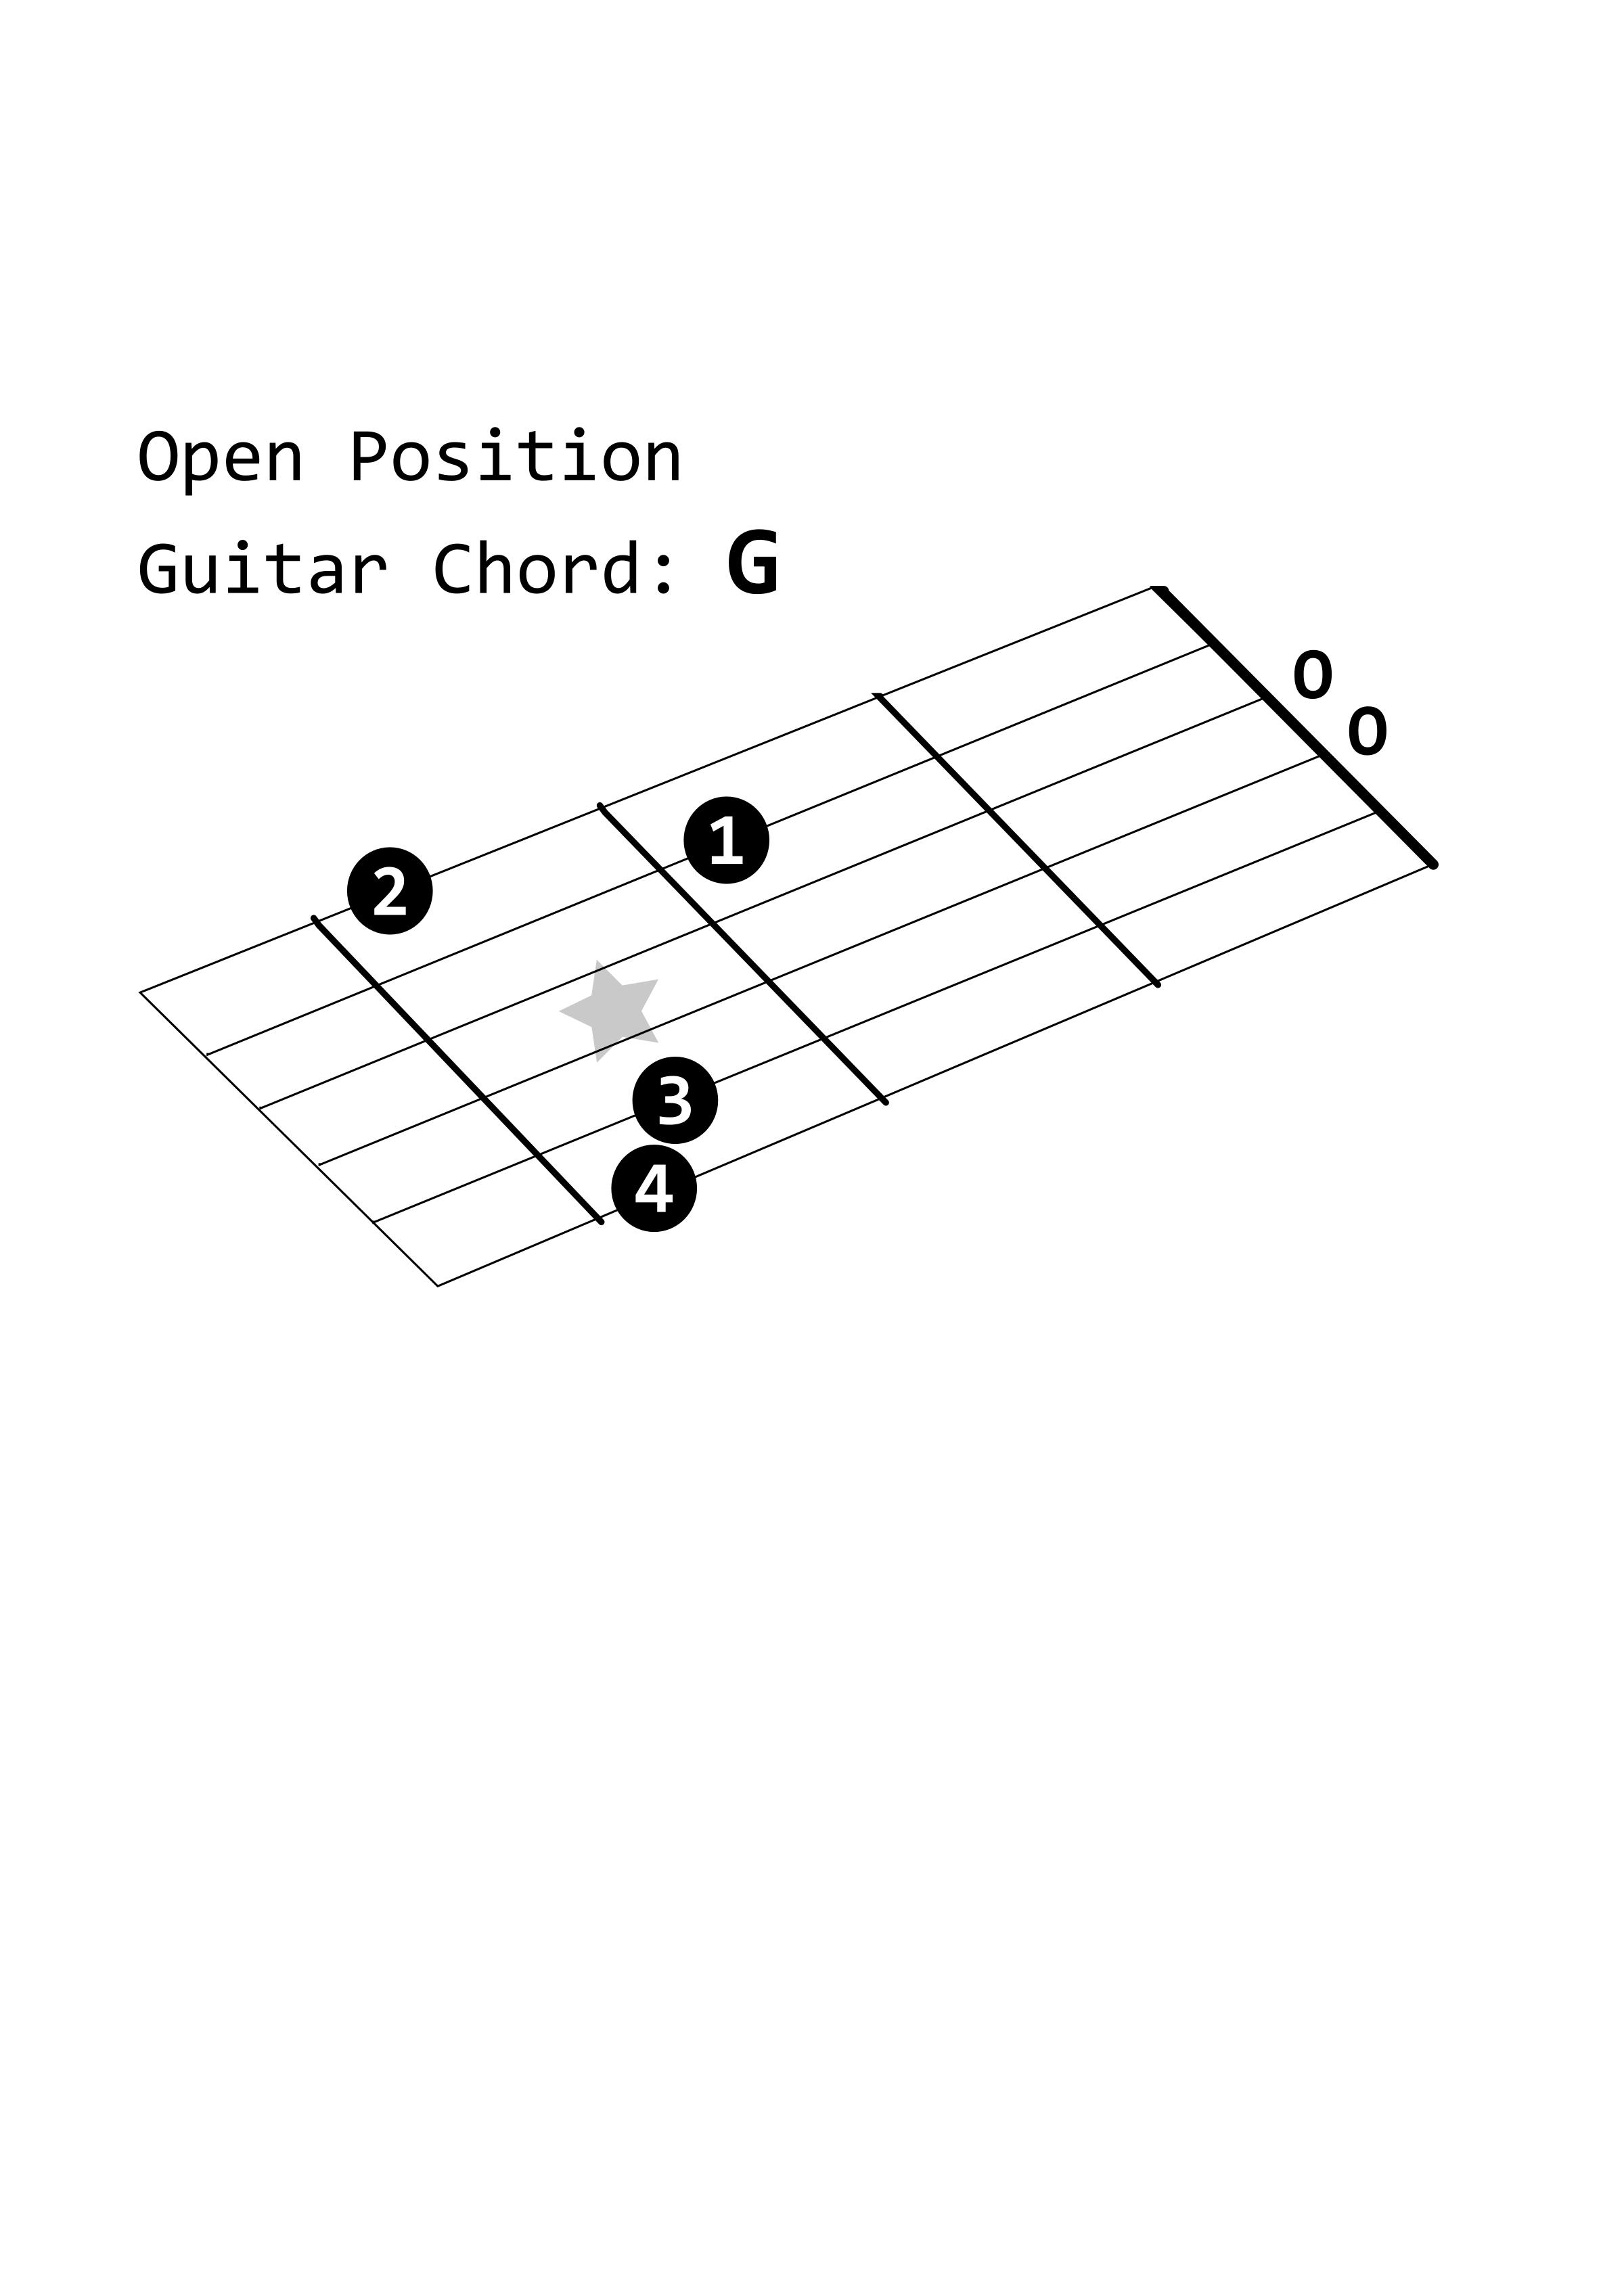 Open Position Guitar Chord icons